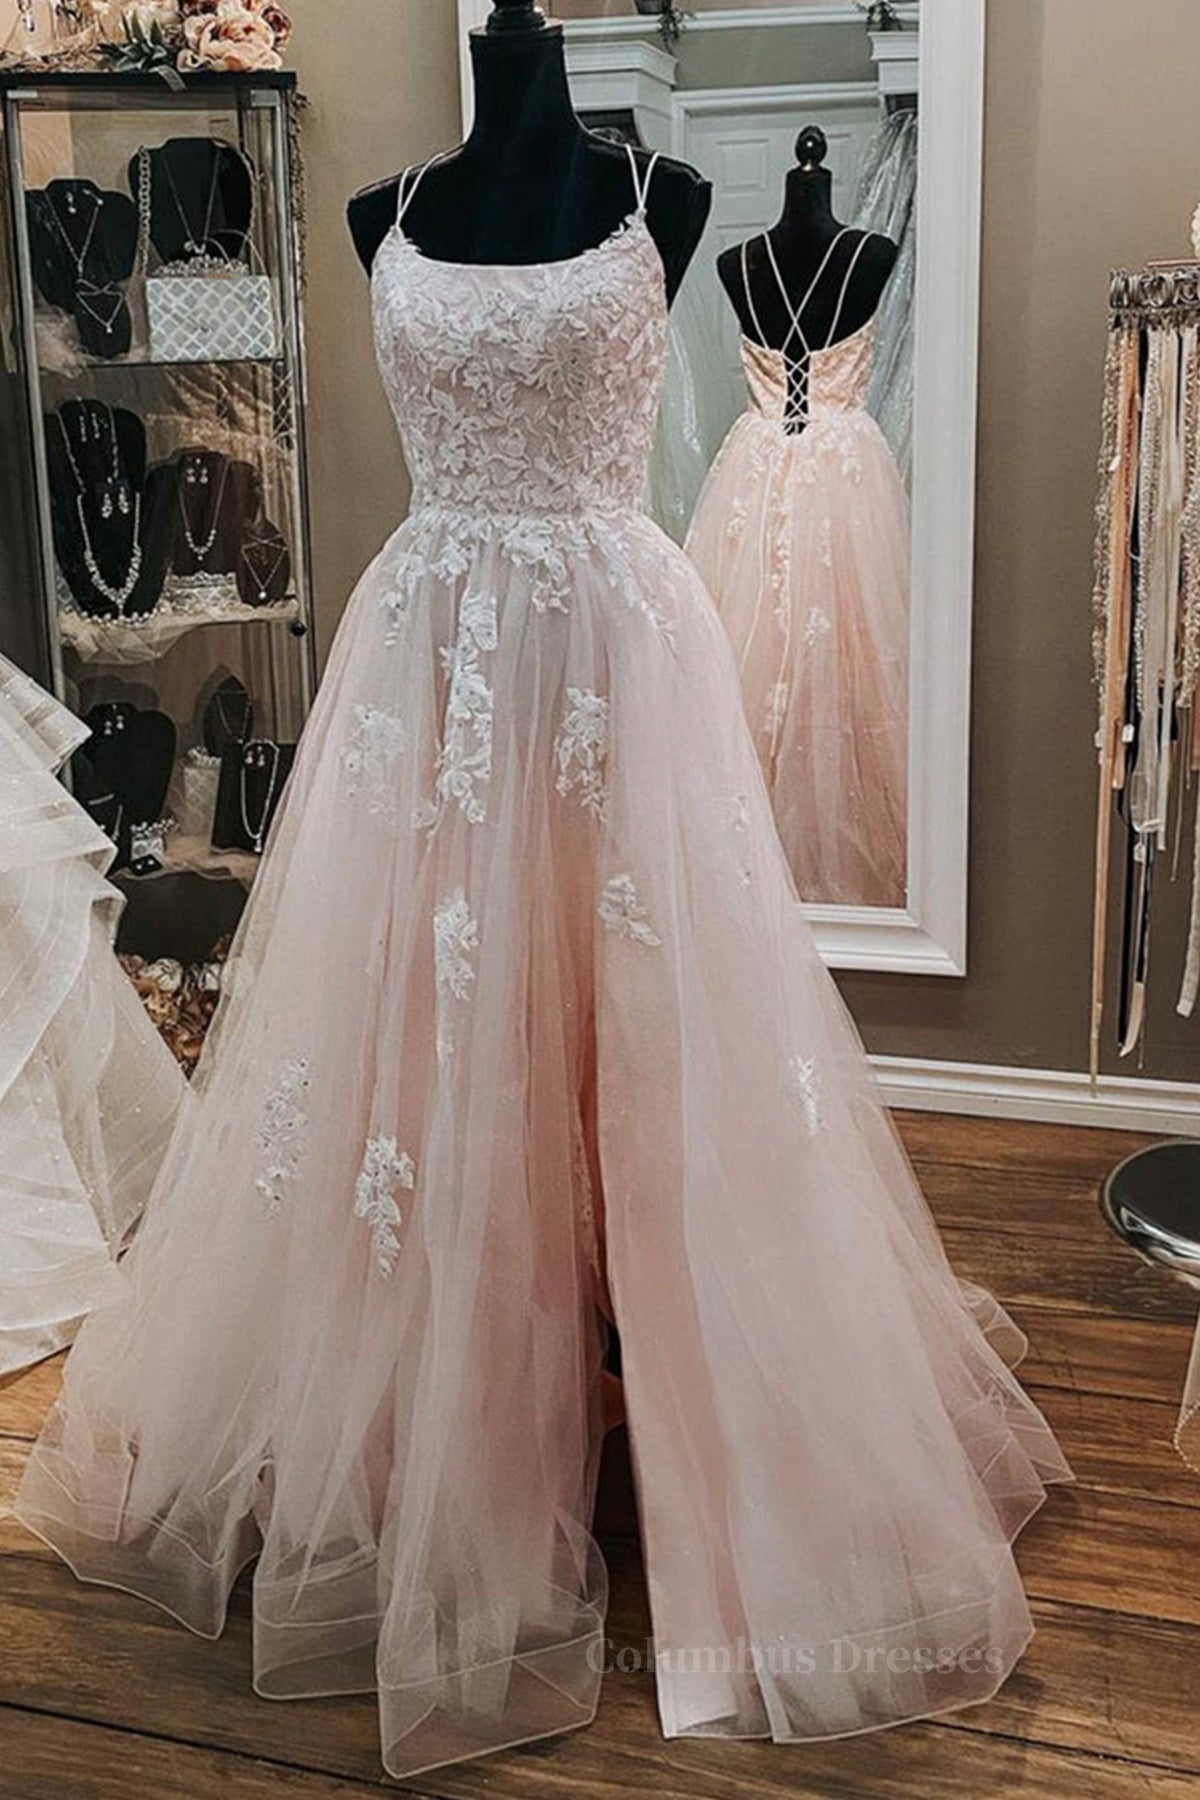 Bridesmaids Dresses Wedding, Open Back Pink Tulle Lace Long Prom Dress with Appliques, Pink Lace Formal Graduation Evening Dress